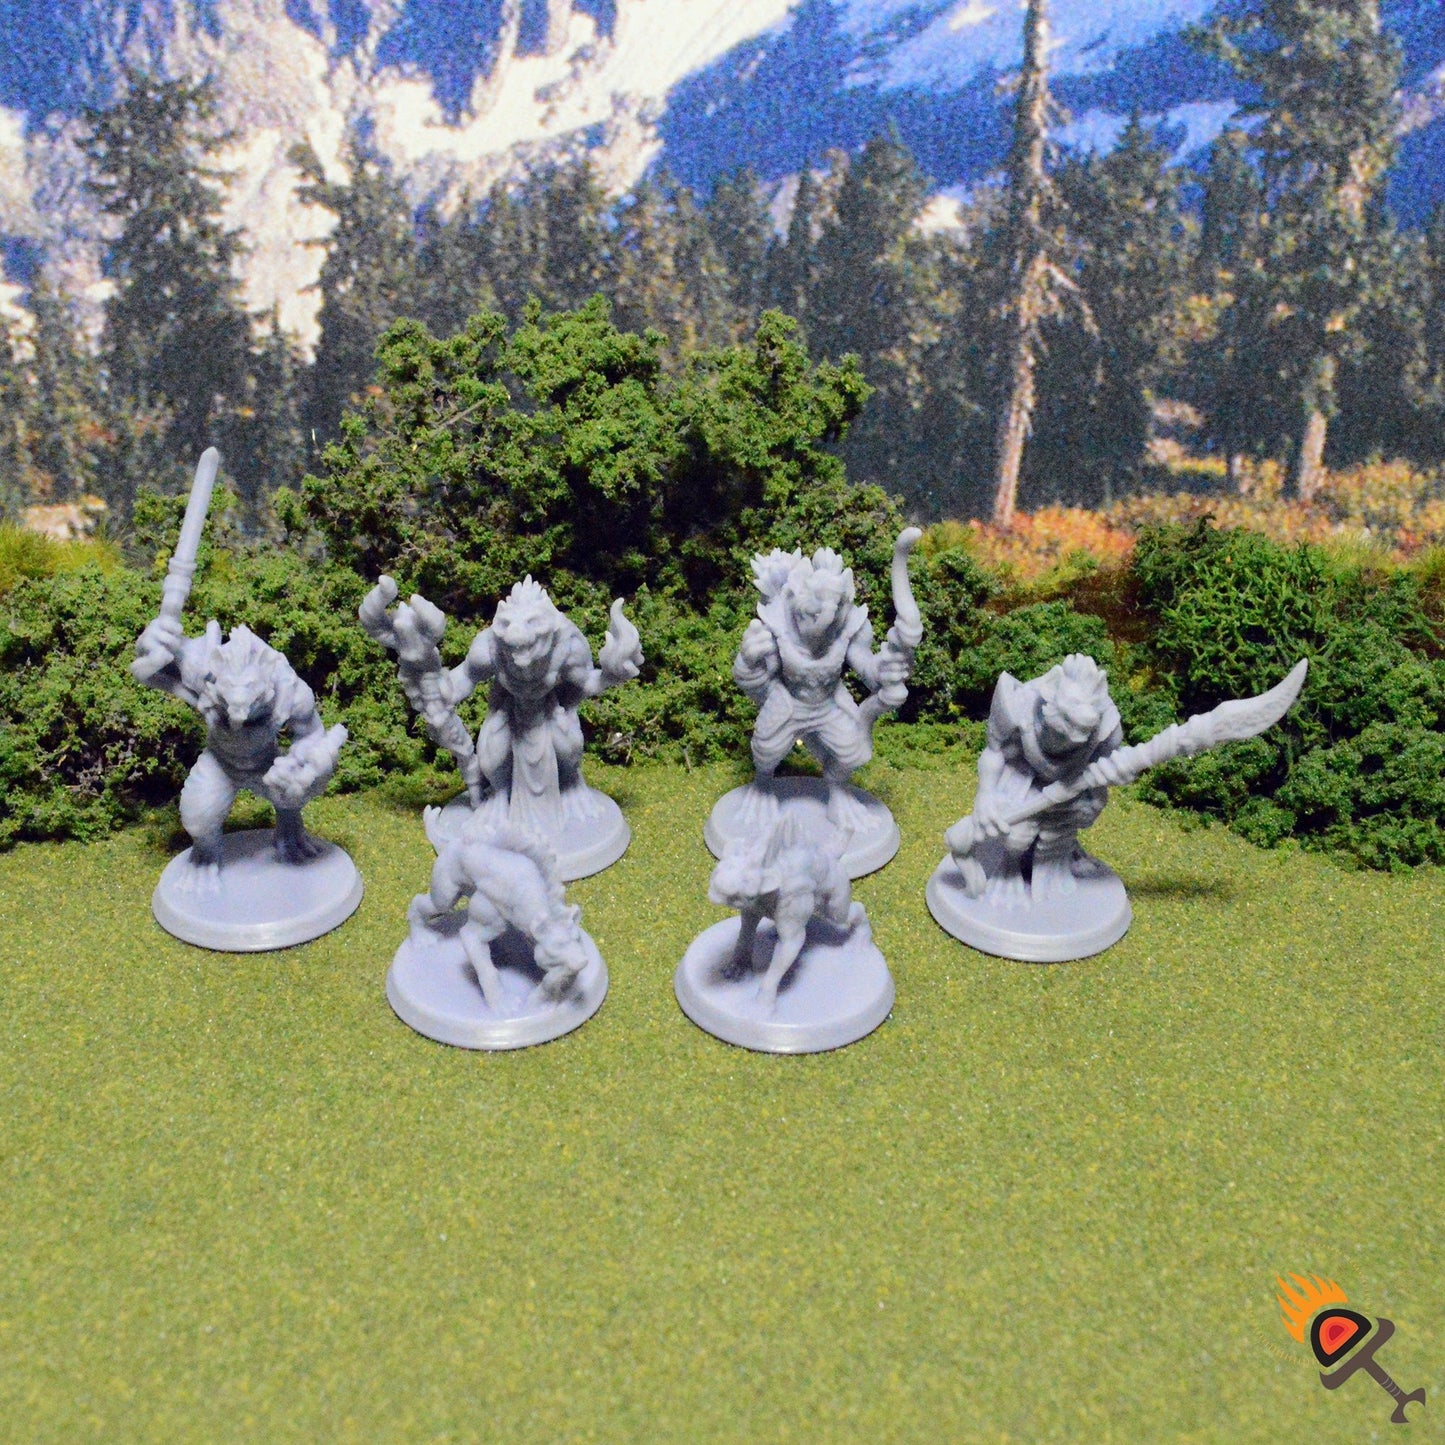 Gnoll Pack with Hyenas 28mm for D&D DnD Pathfinder Miniatures, EC3D Beast and Baddies